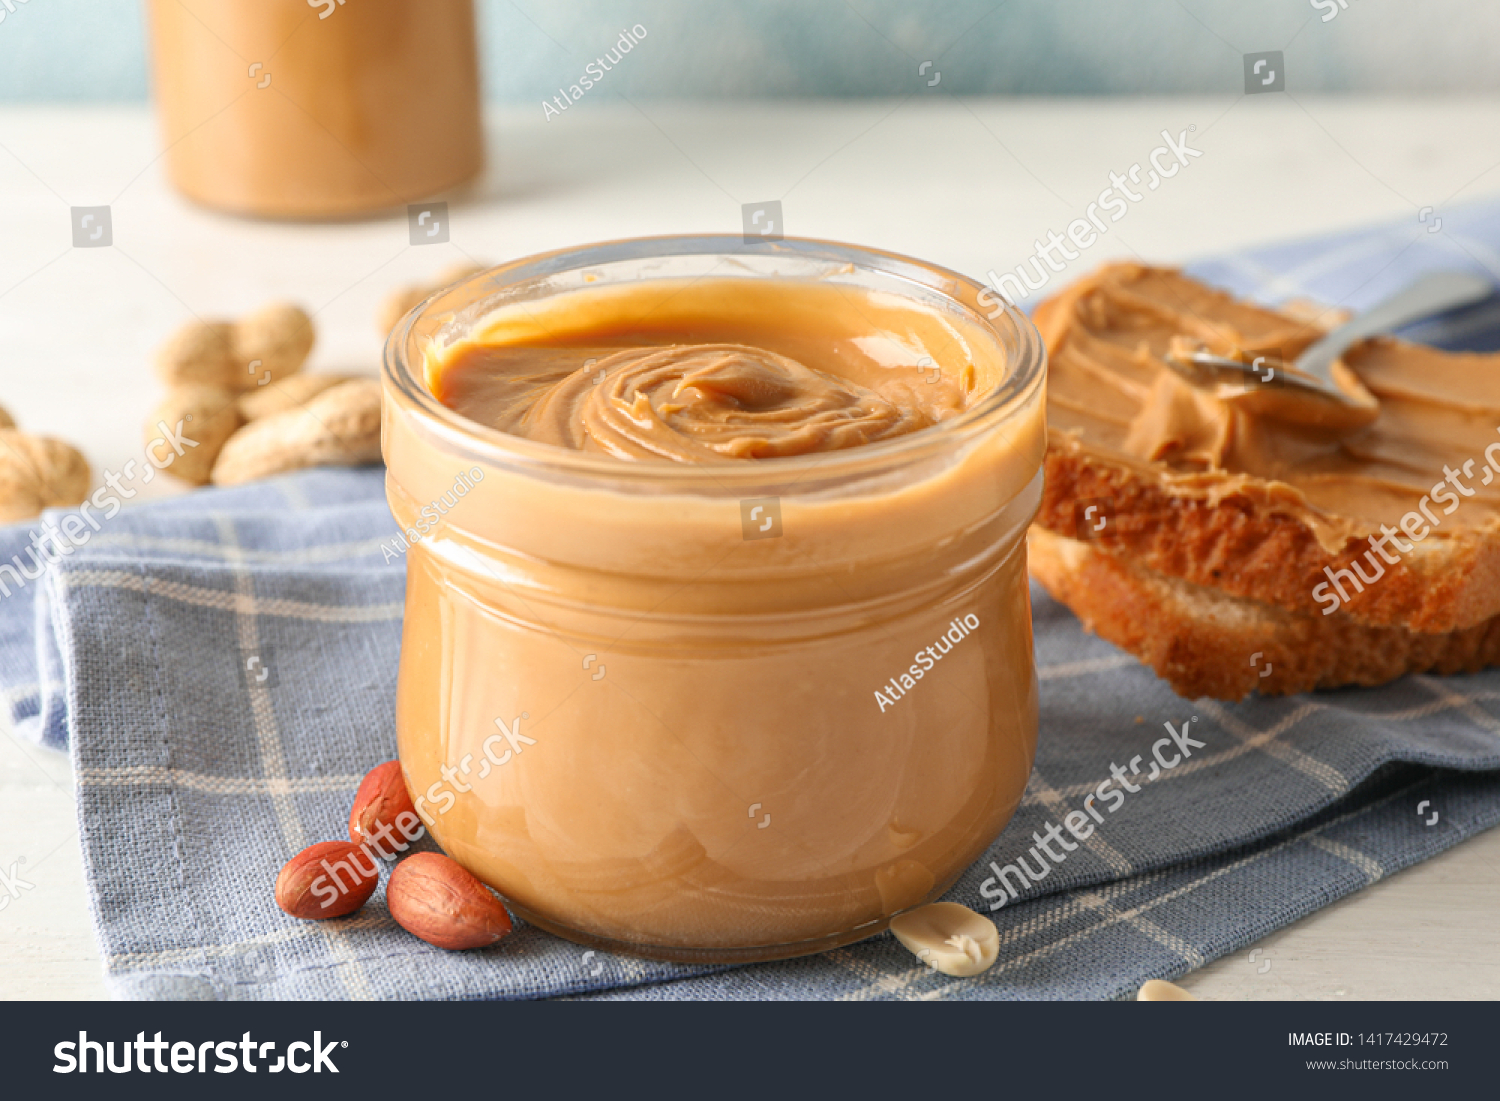 Glass jar with peanut butter, peanut, kitchen towel, spoon and peanut butter sandwich on white wooden background, space for text and closeup #1417429472